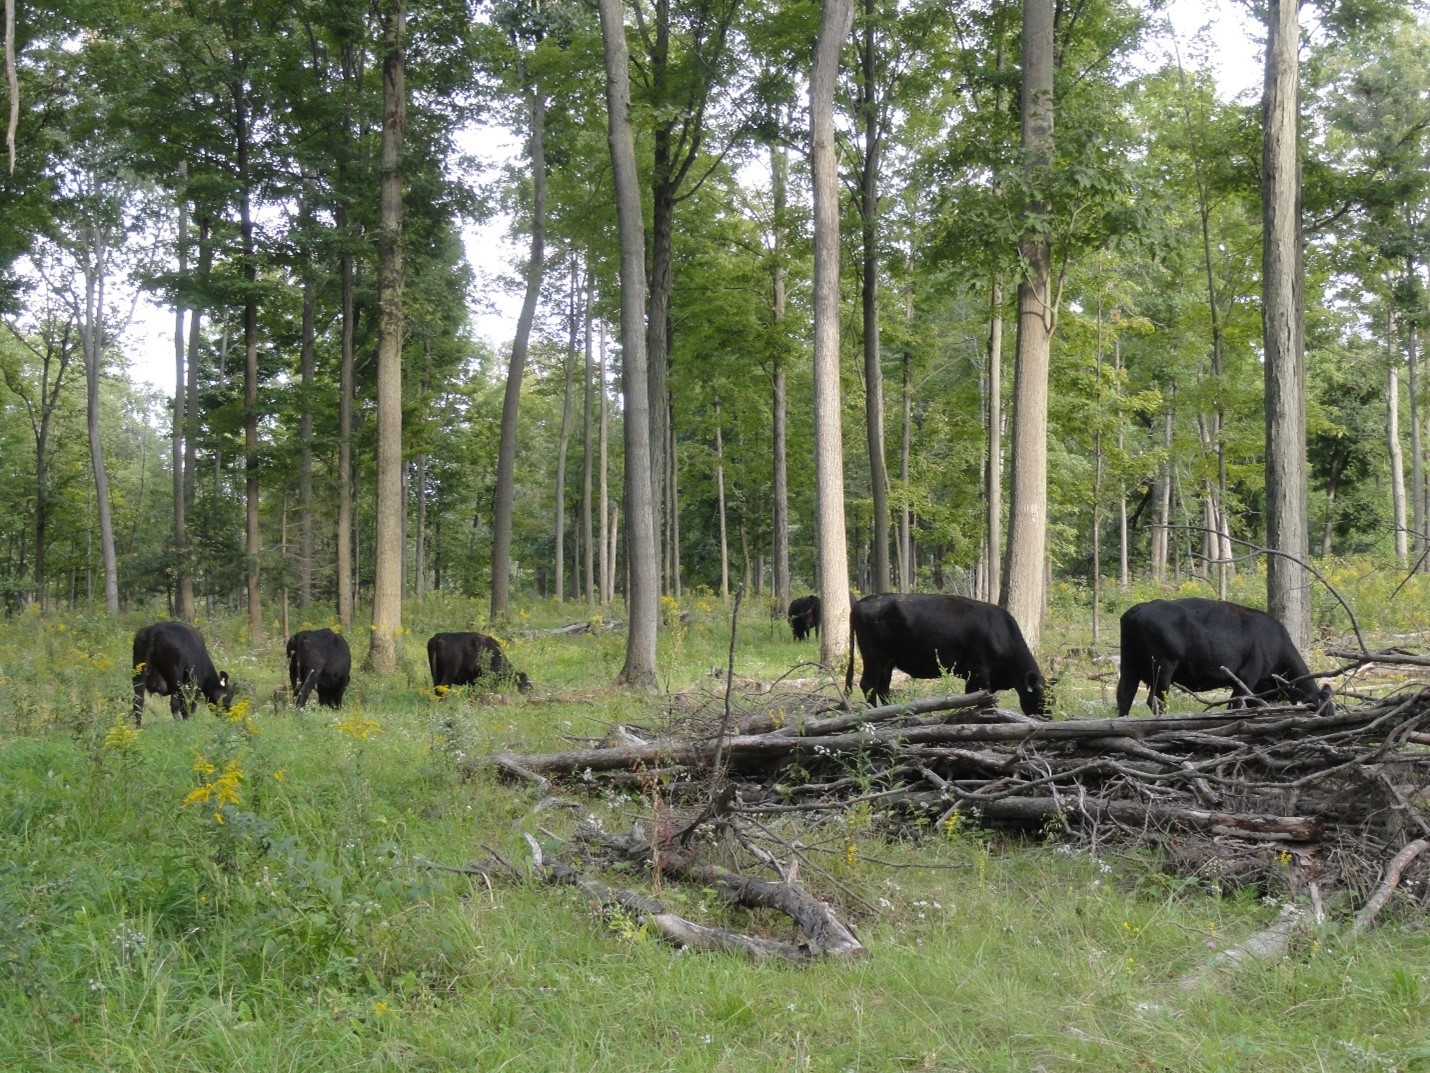 Beef cattle pasturing in a wooded area.